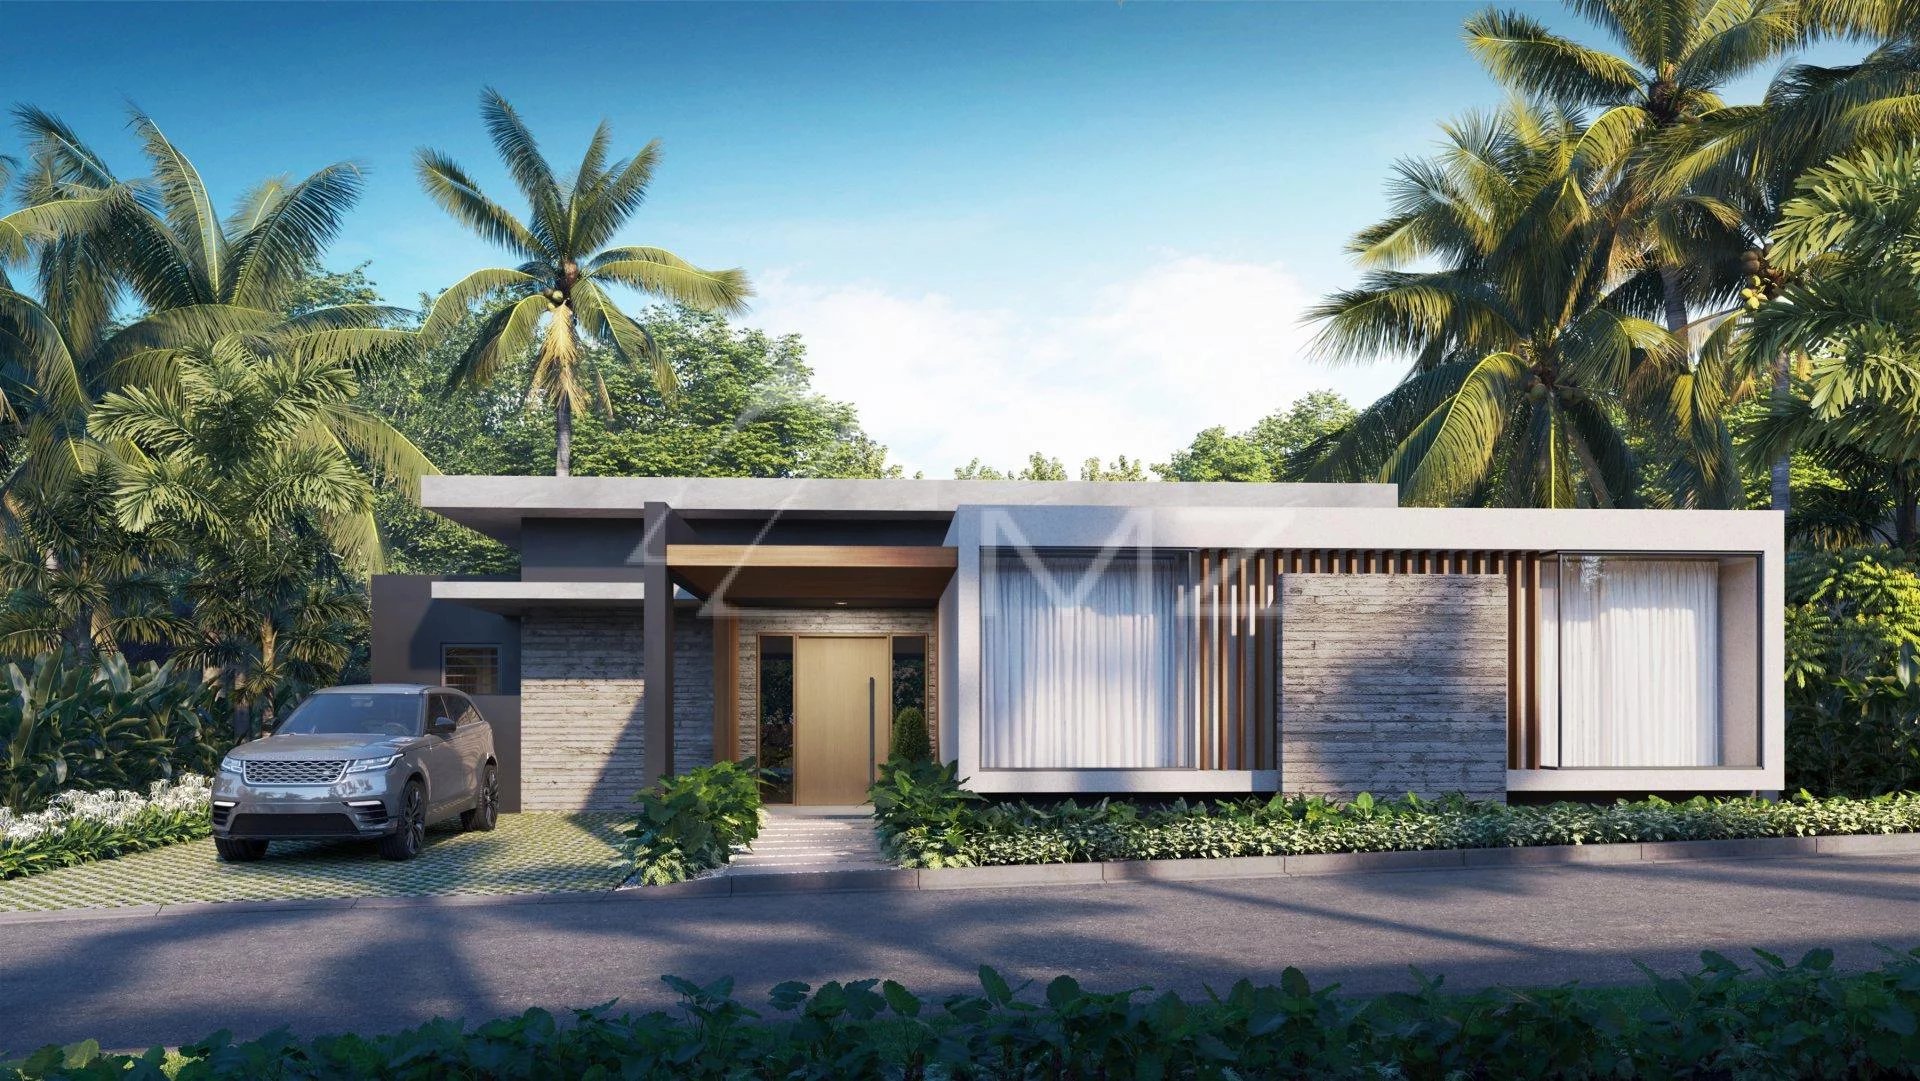 Mauritius - Villa in the heart of a residential area - Grand Bay